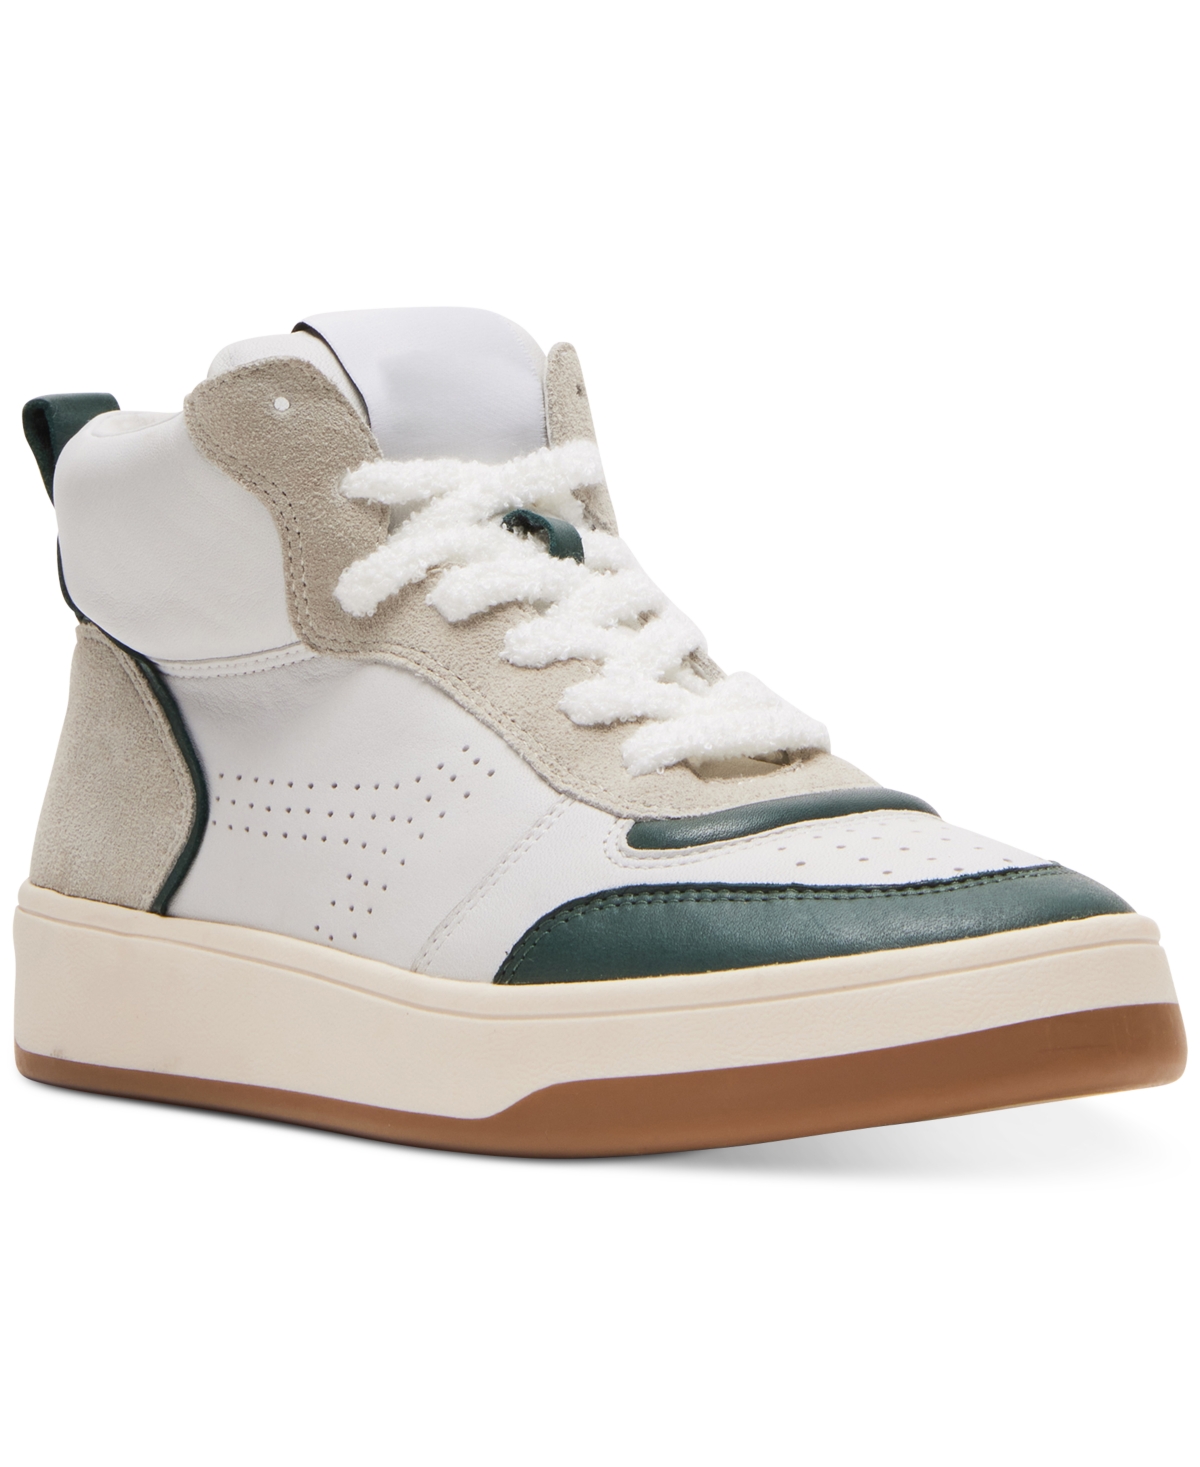 Steve Madden Women's Calypso High-top Lace-up Sneakers In Green,white